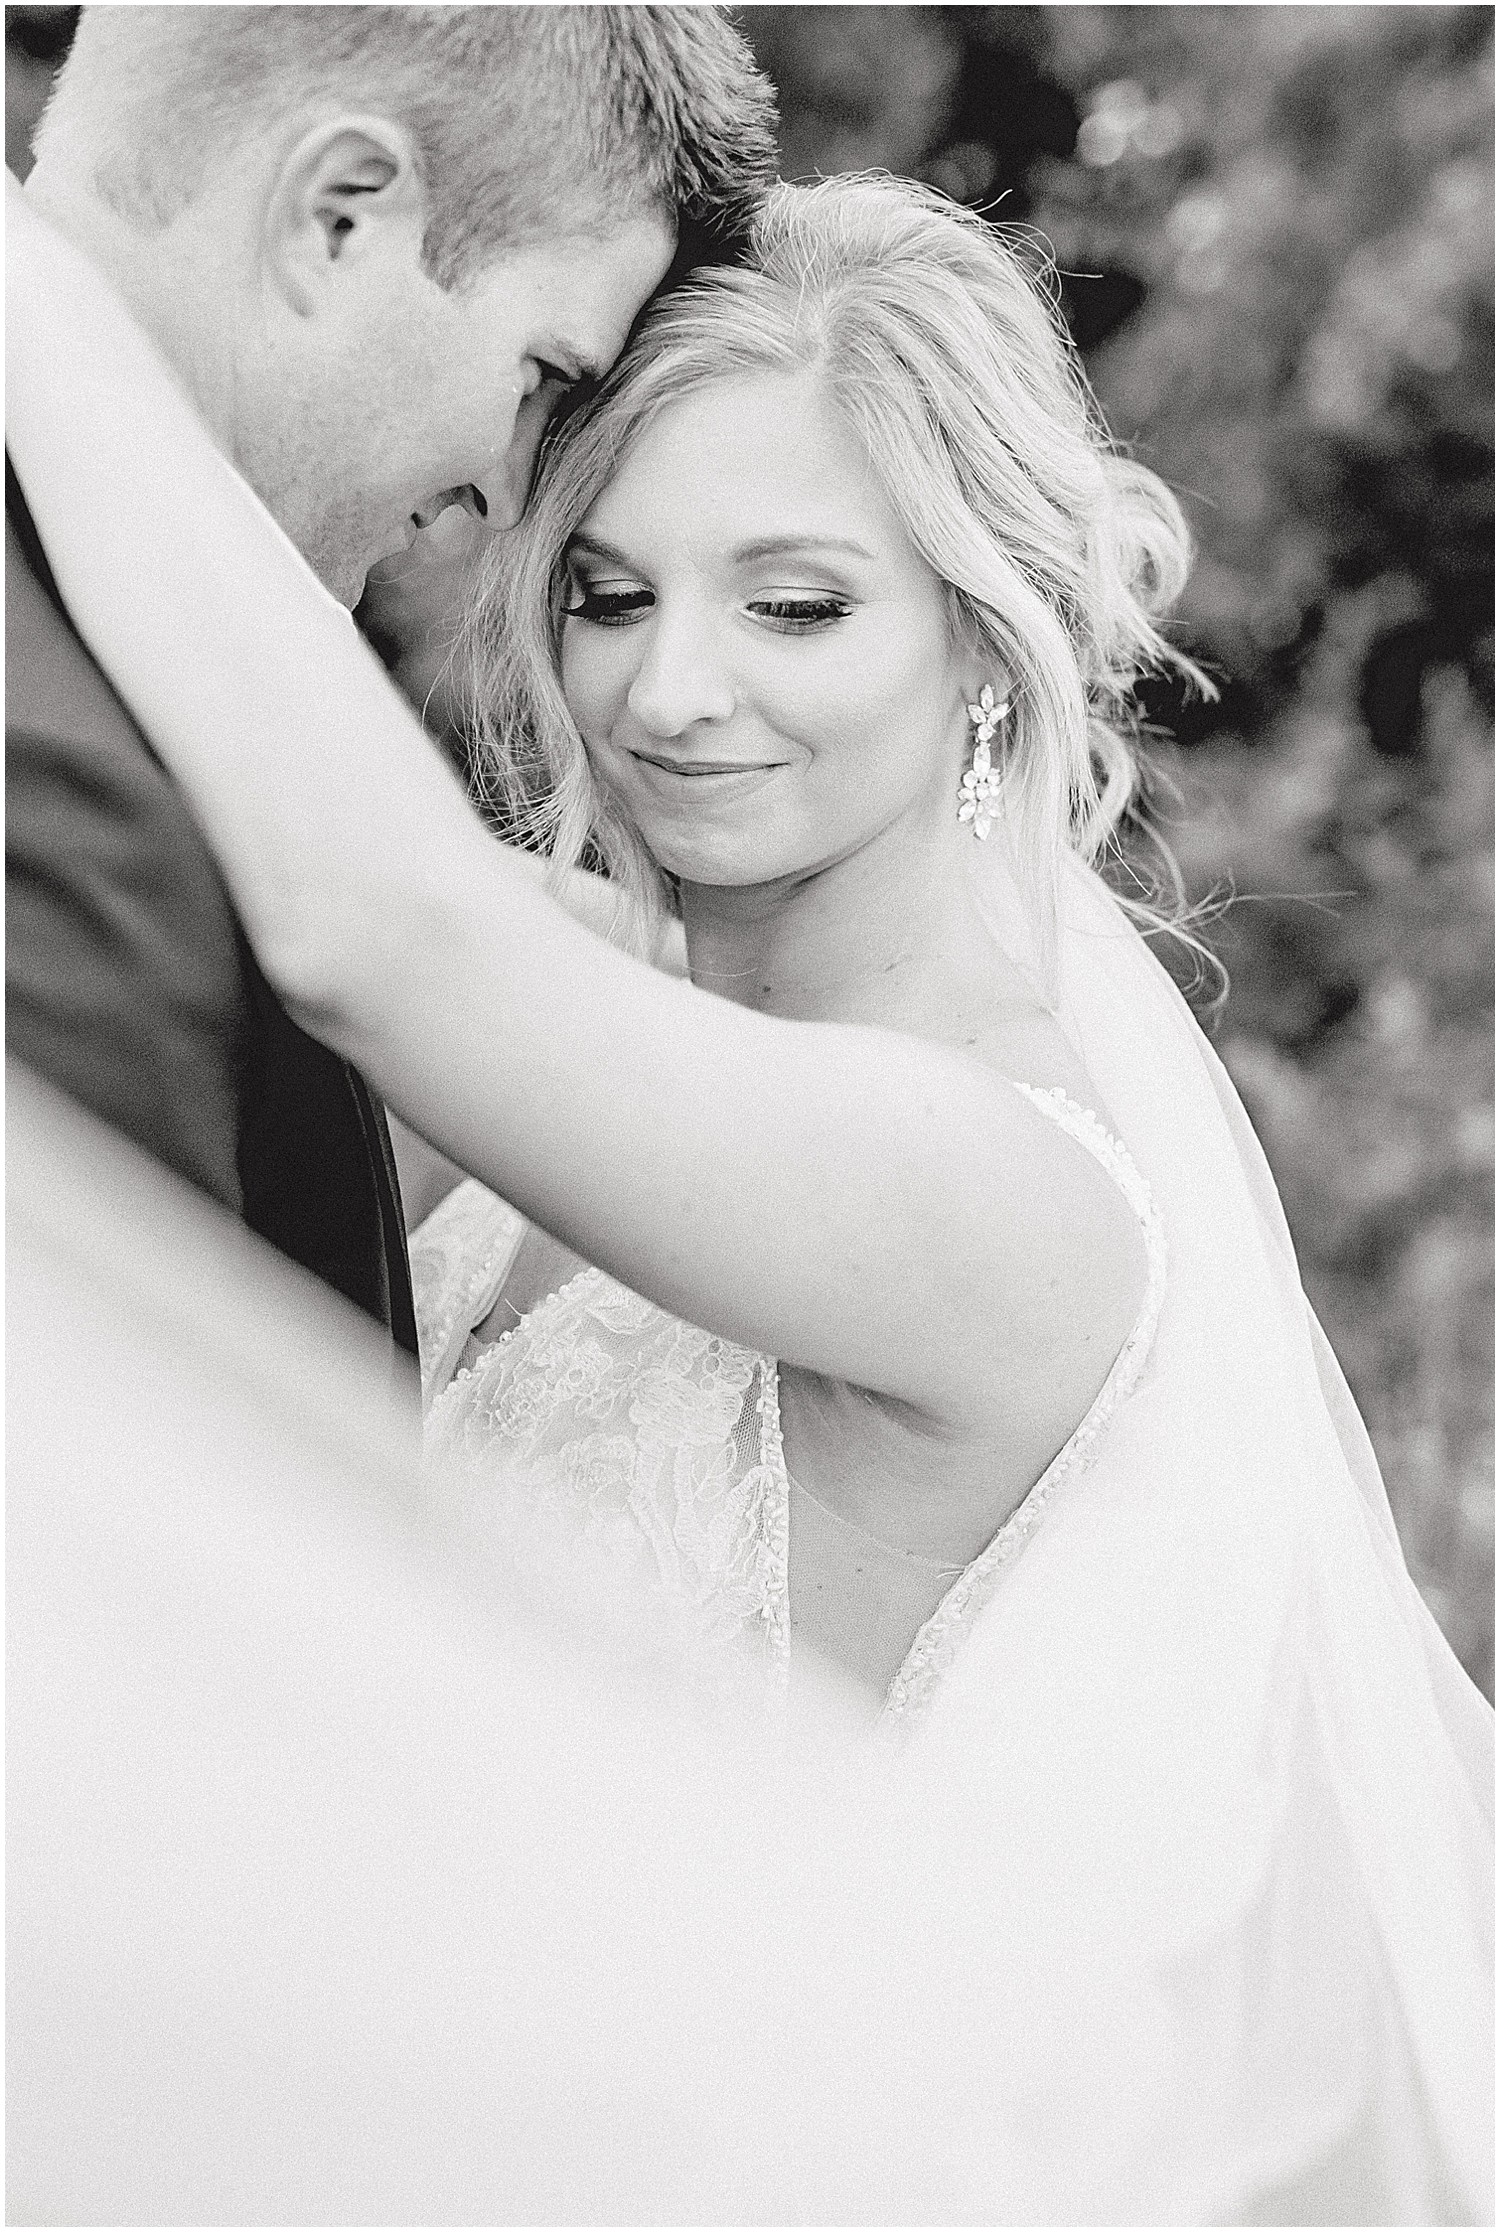 black and white image of bride and groom hugging while veil blows in front